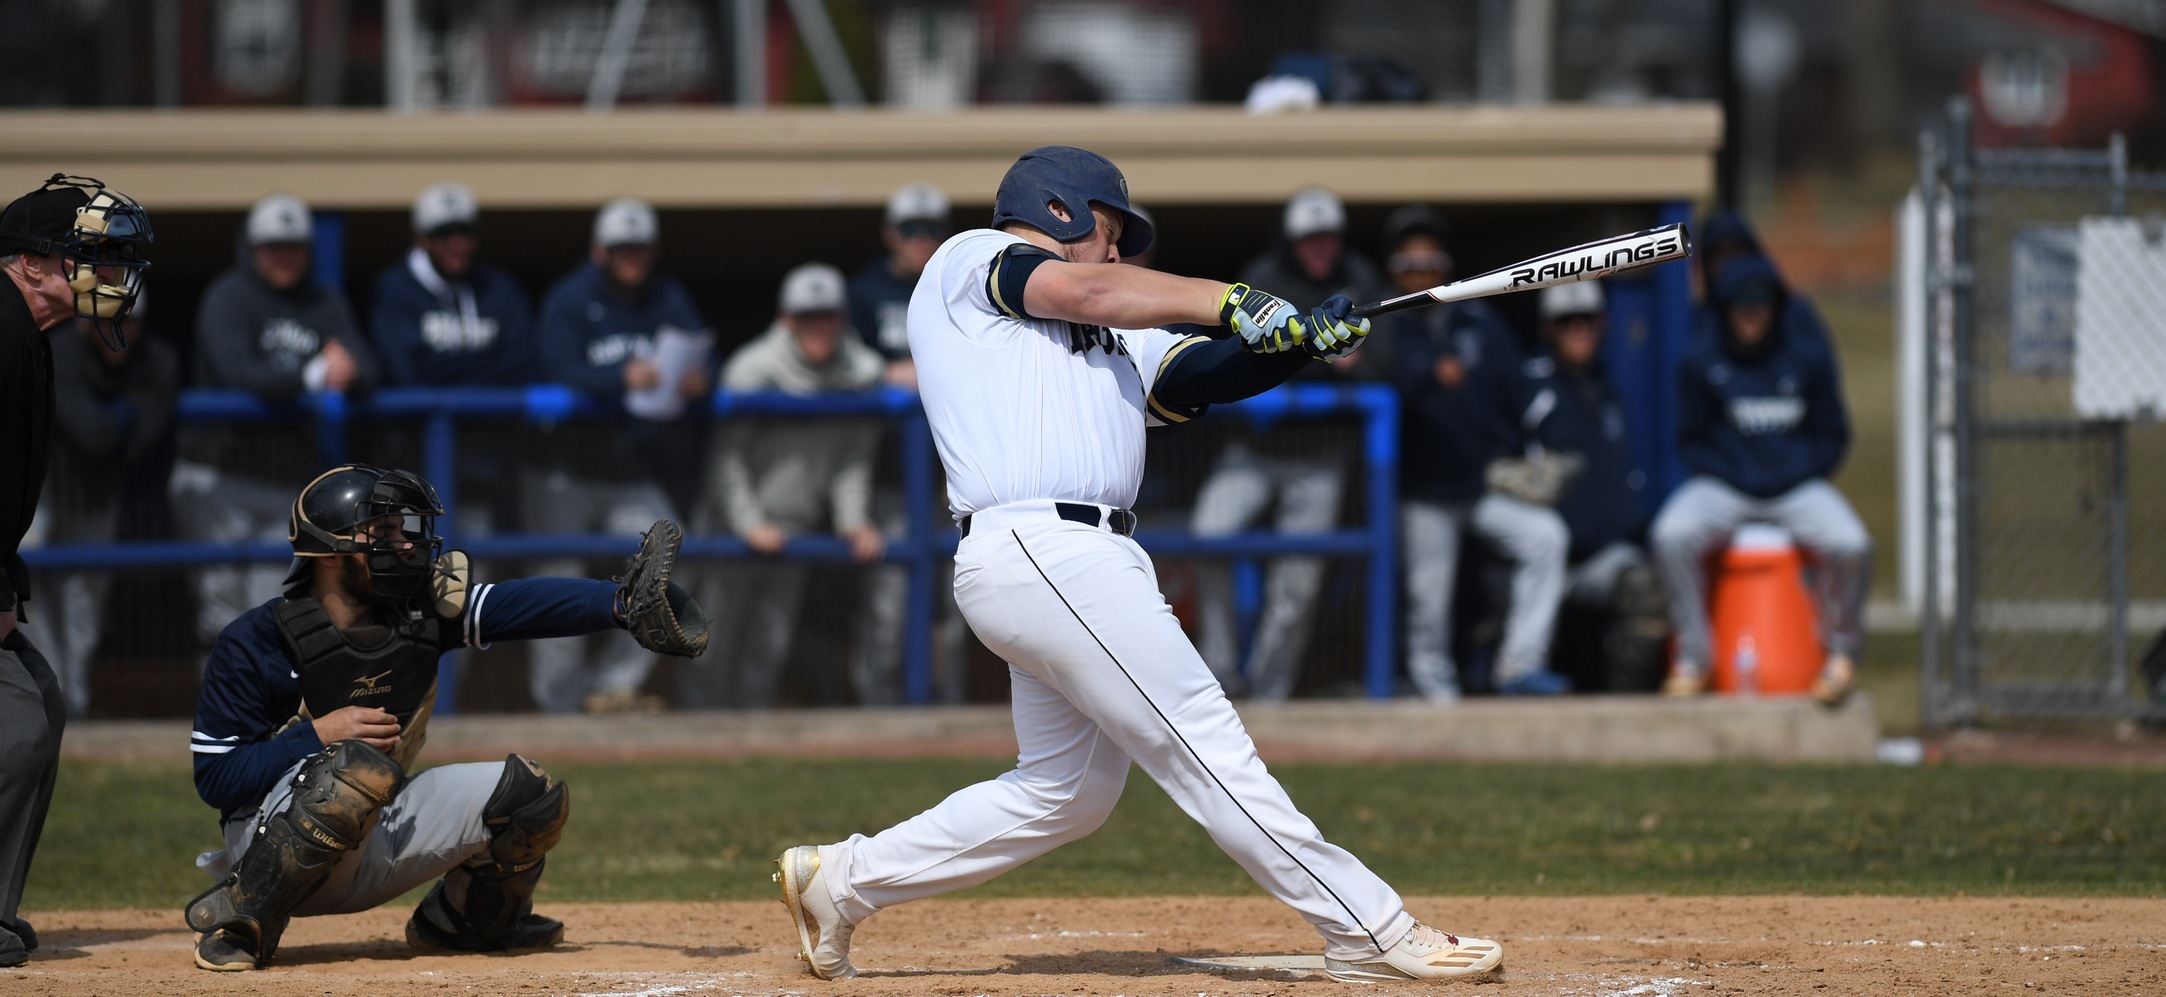 Adam Kipp went 2-5 with three-run blast in the bottom of the ninth to tie the game against Drew, Sunday.